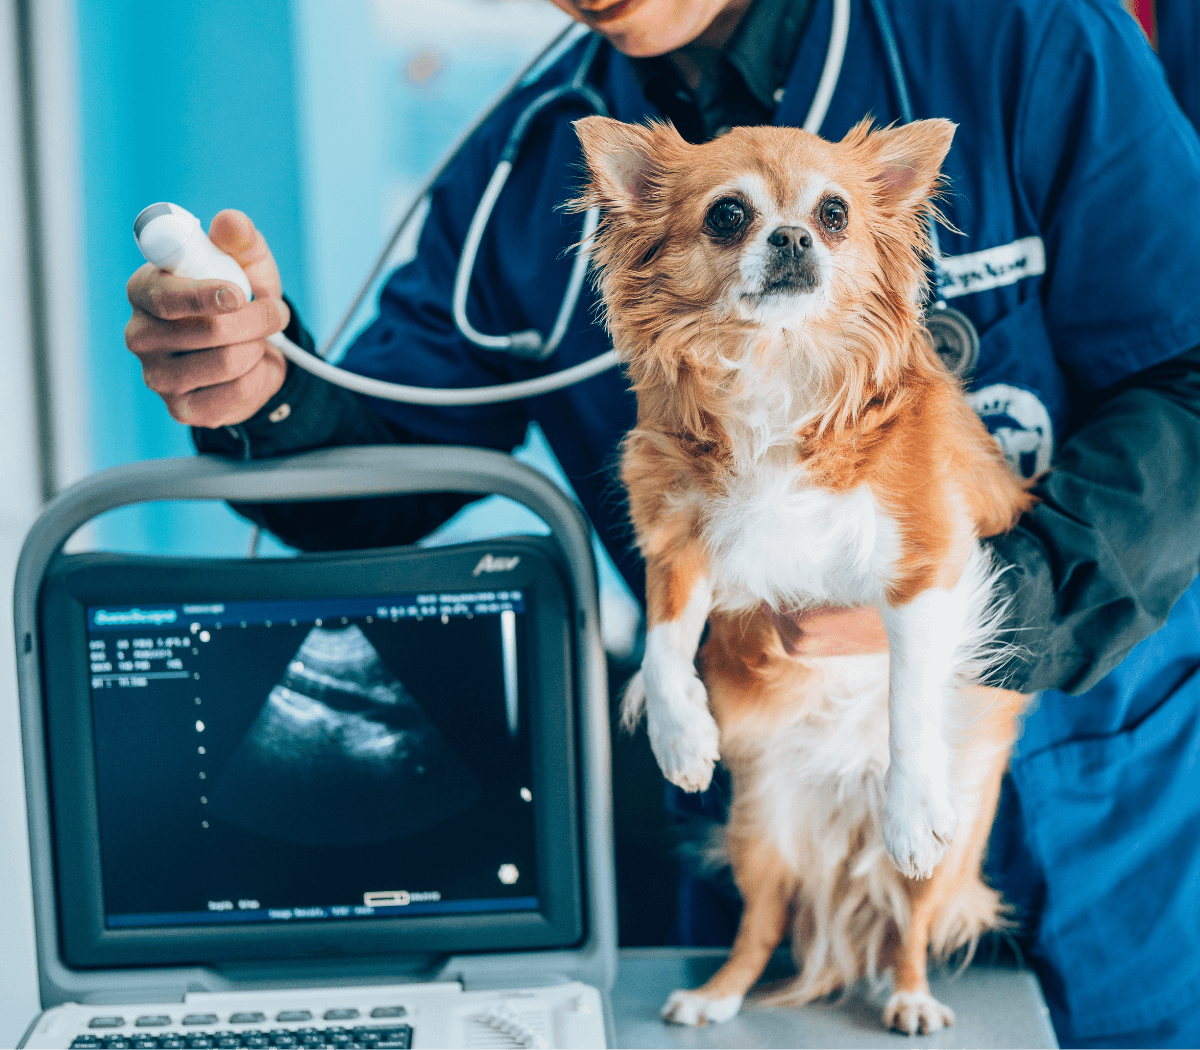 A veterinarian uses ultrasound to examine a dog